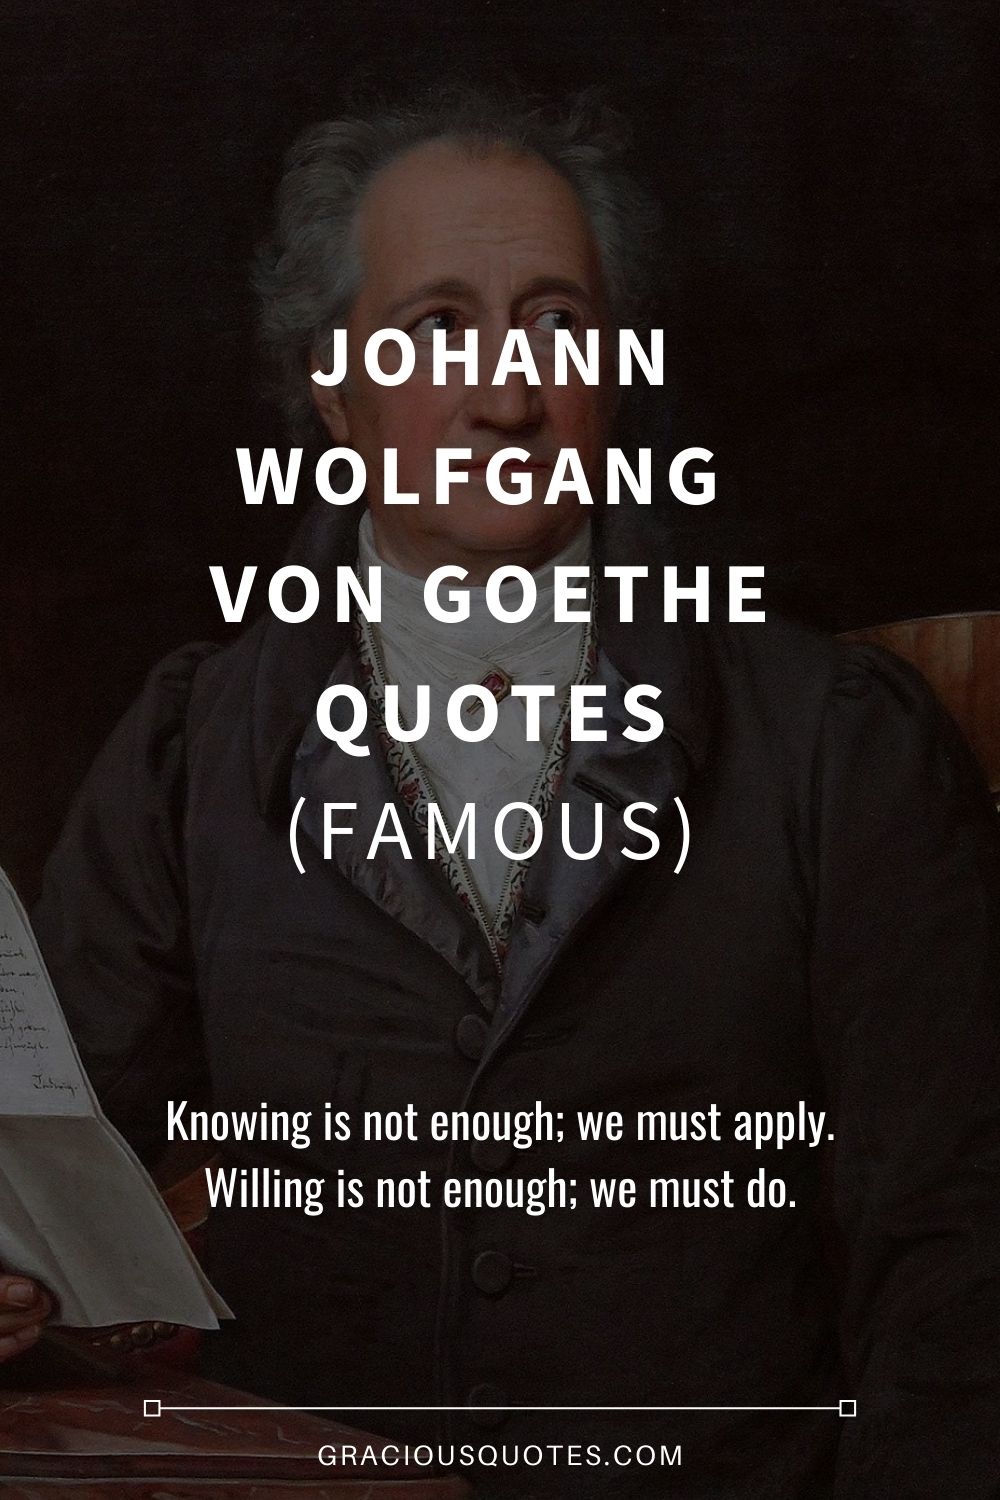 Johann Wolfgang von Goethe Quotes (FAMOUS) - Gracious Quotes